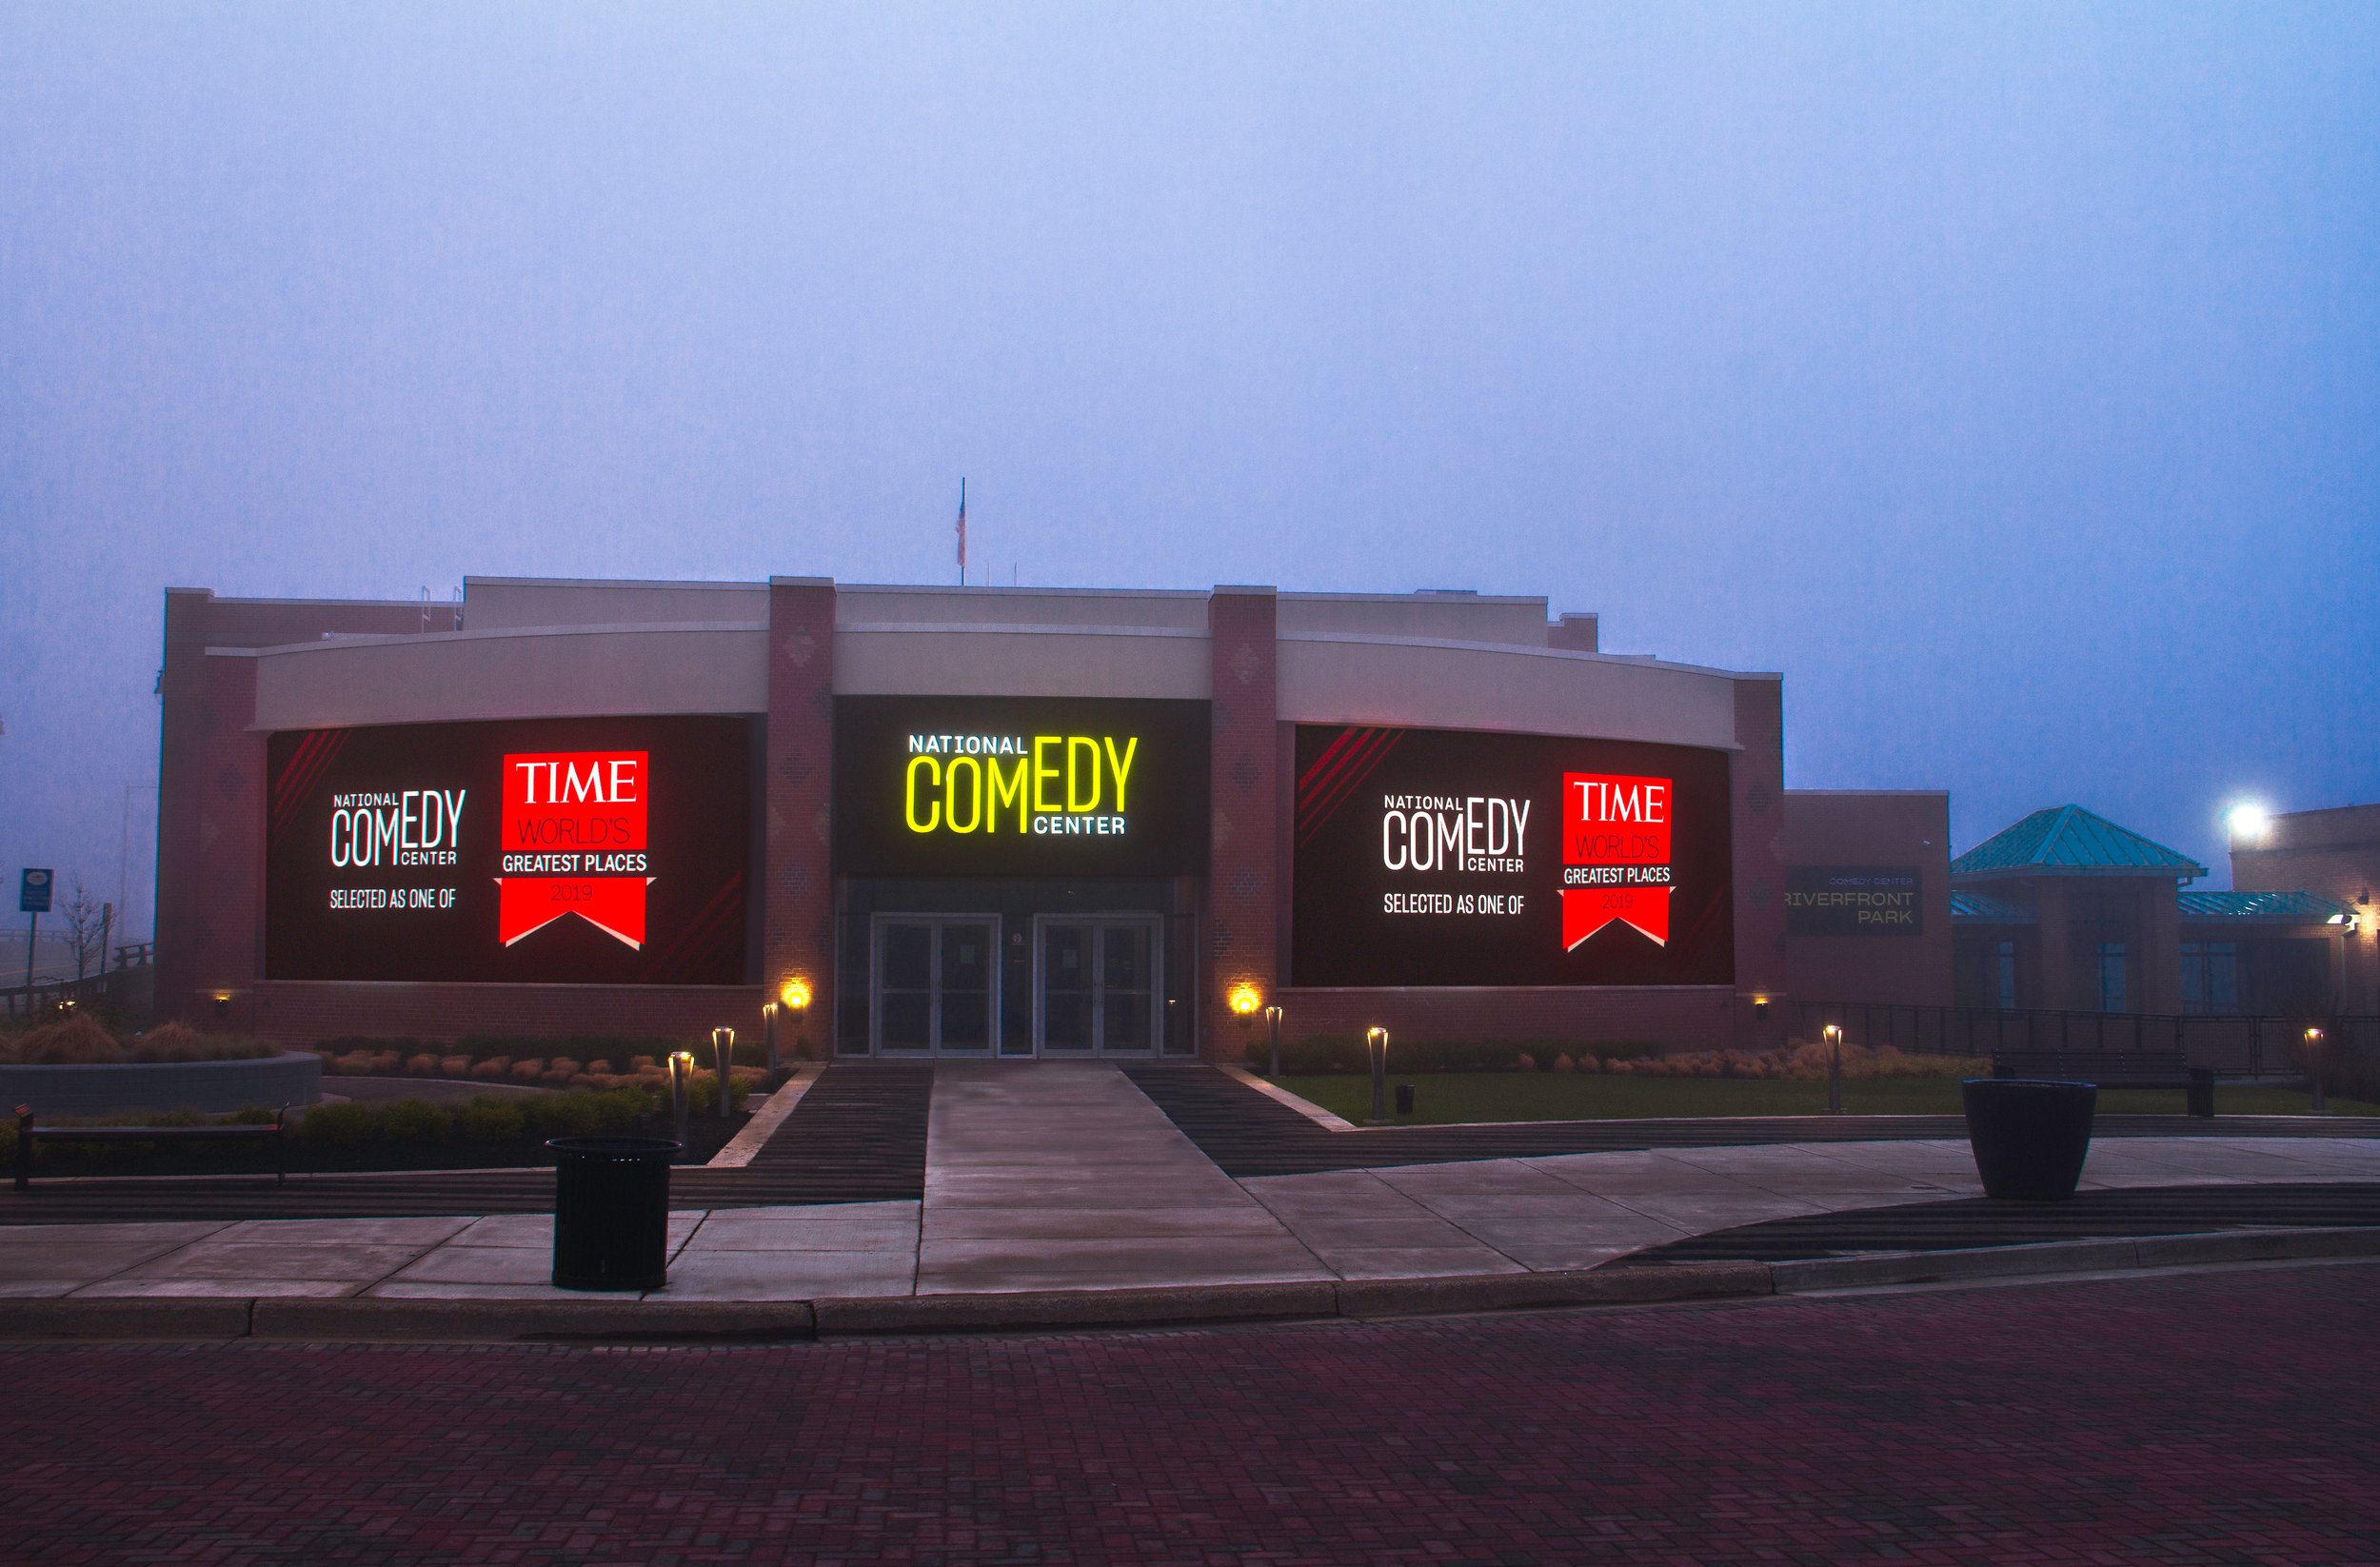 national-comedy-center-in-jamestown-ny